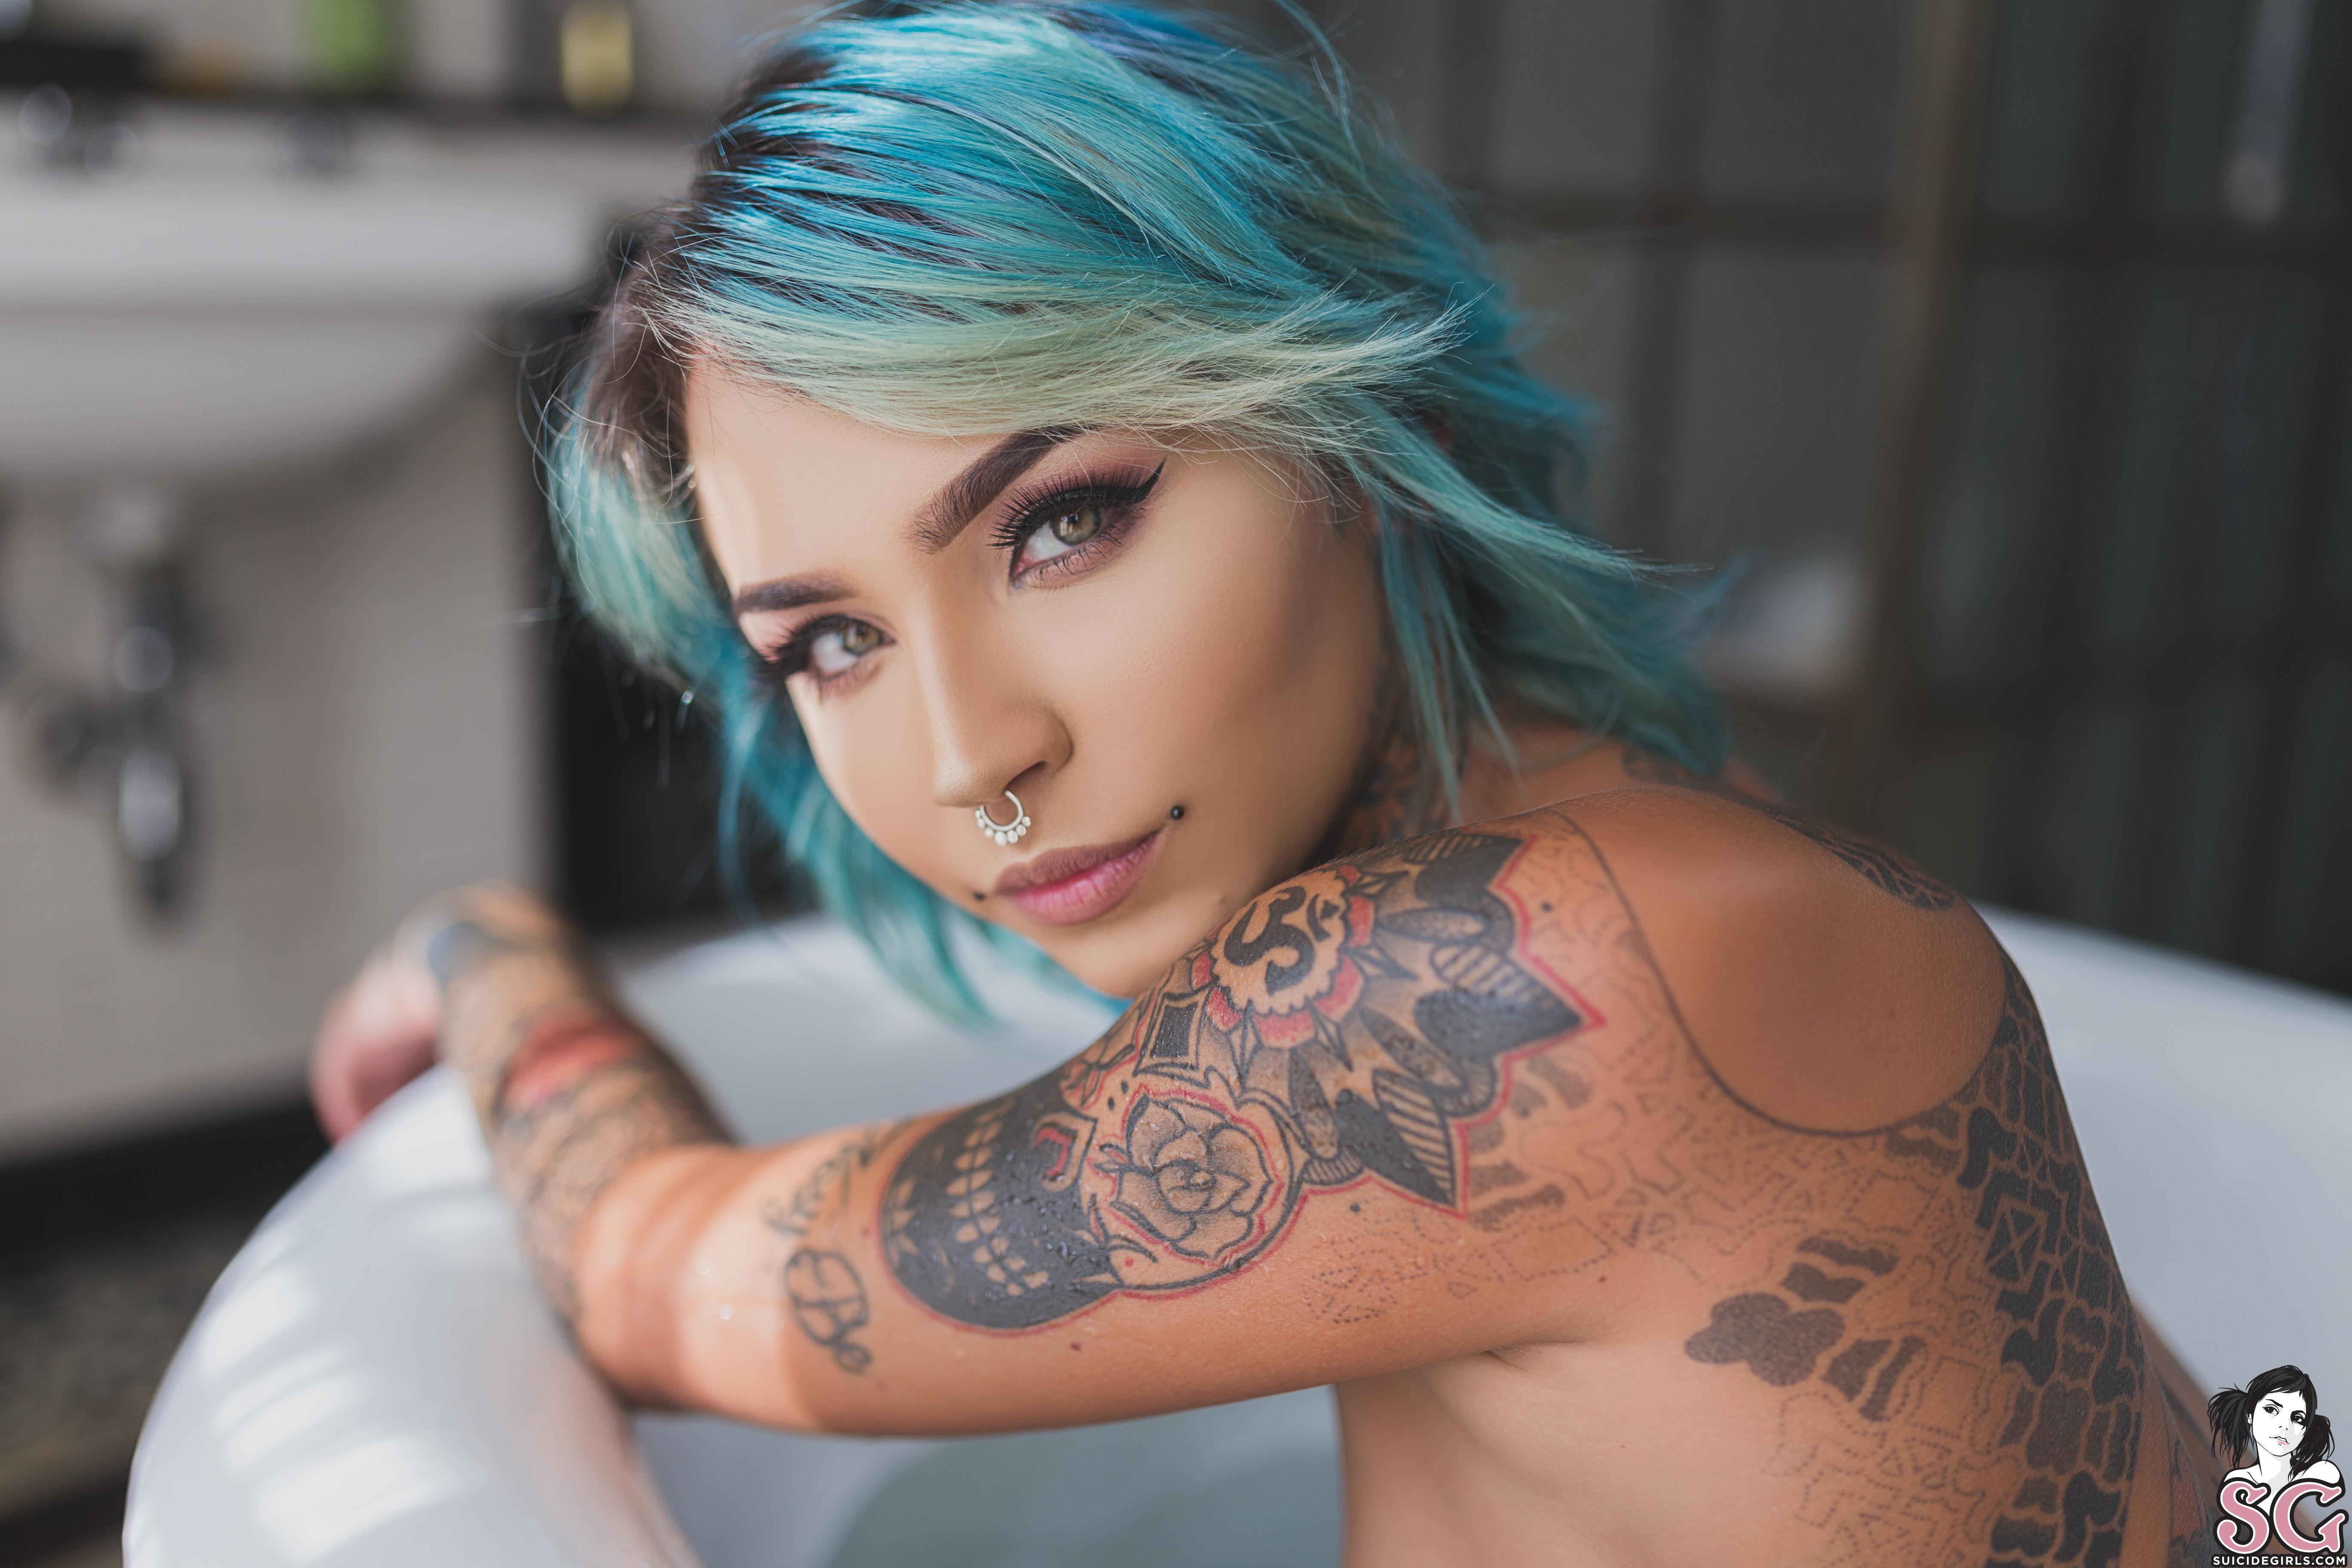 Fishball Suicide - wide 1